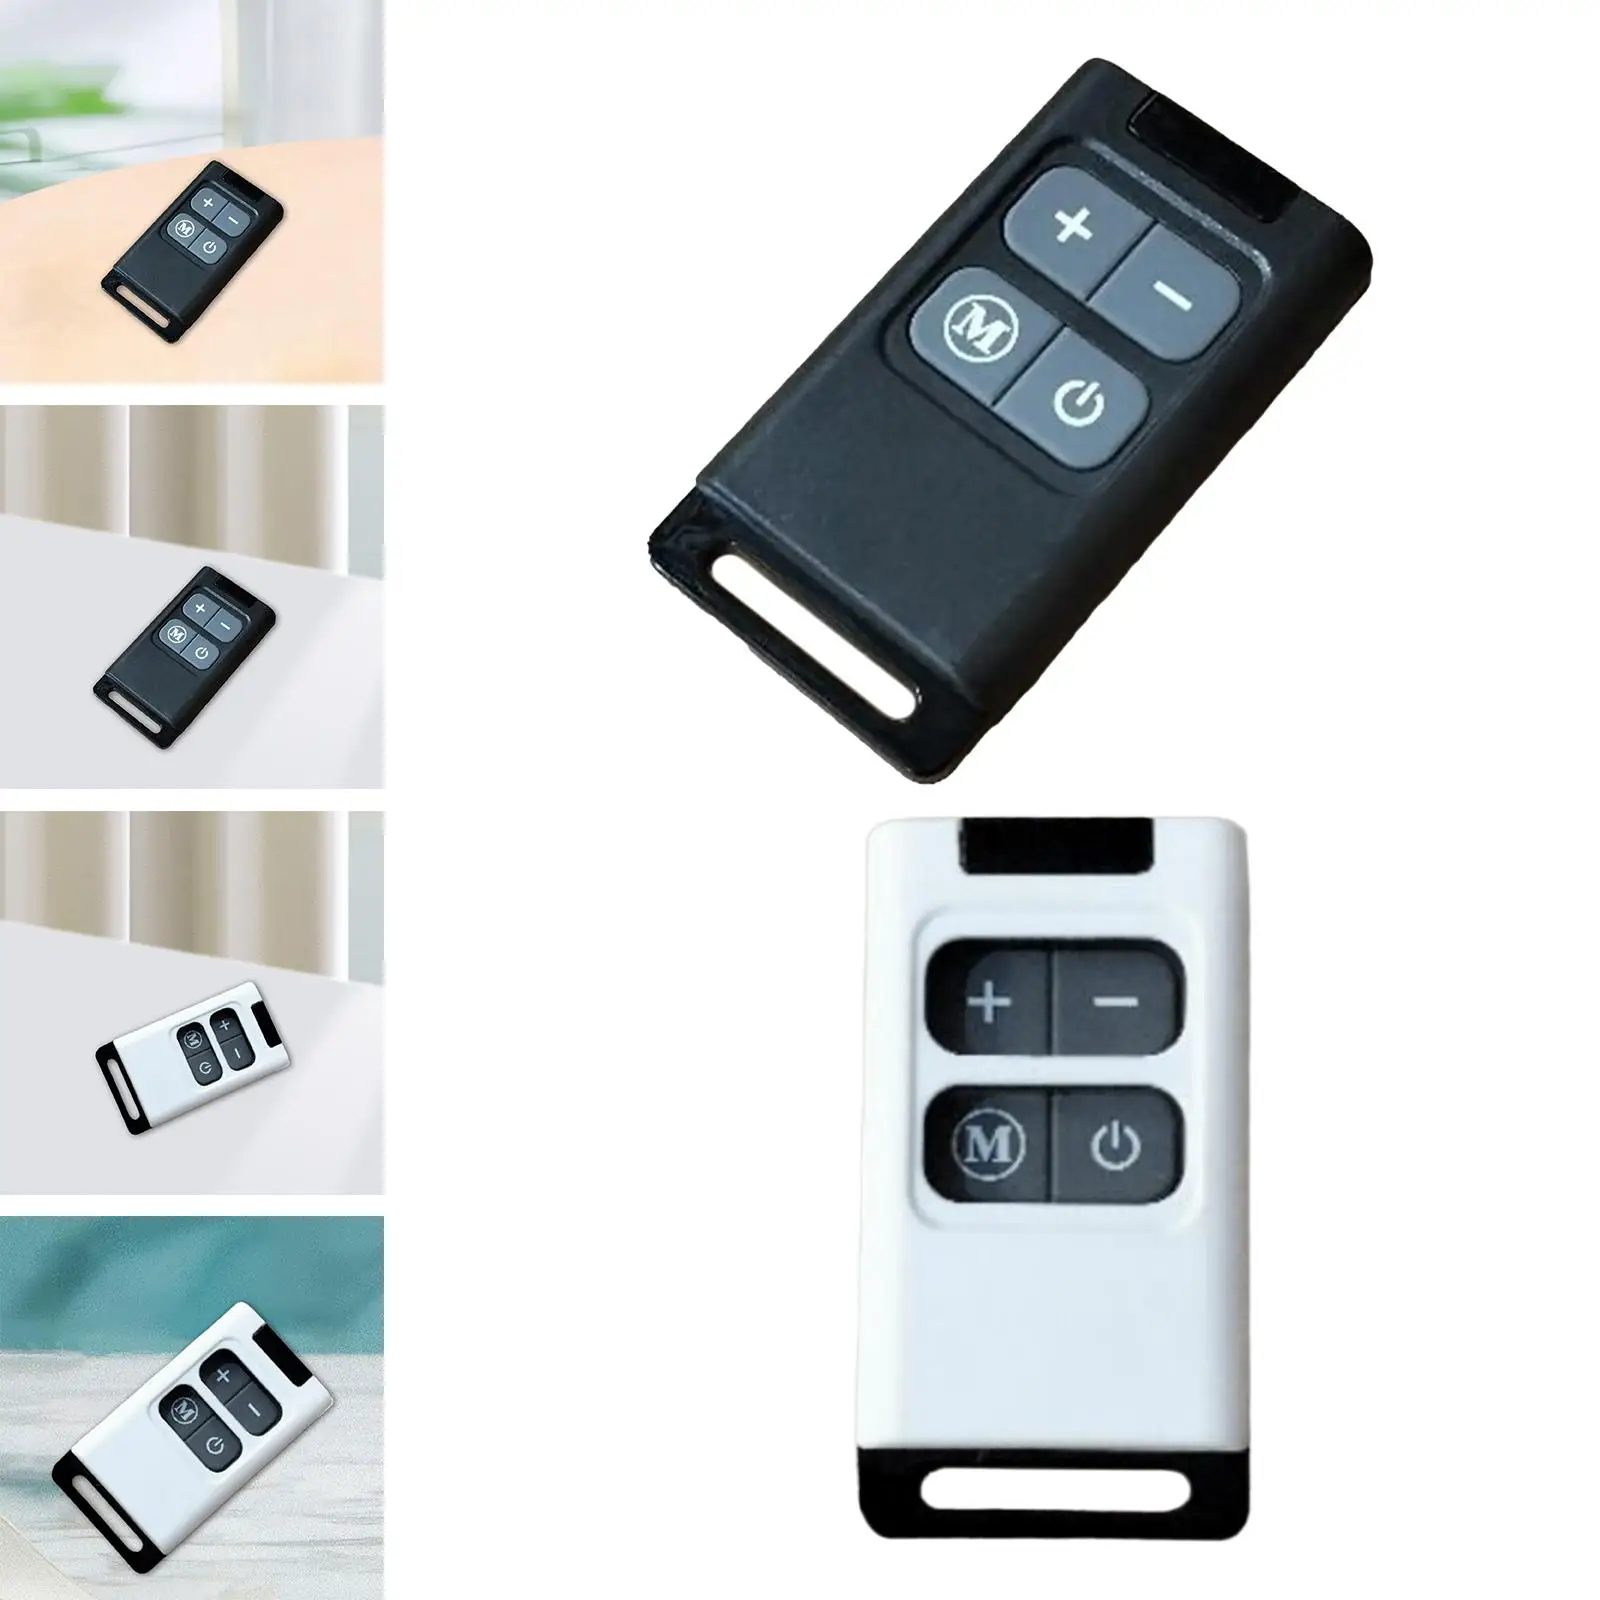 Car Parking Heater Remote Control Universal for Heater Controller Automotive Boat Car Diesels Air Heater Parking Heater RV